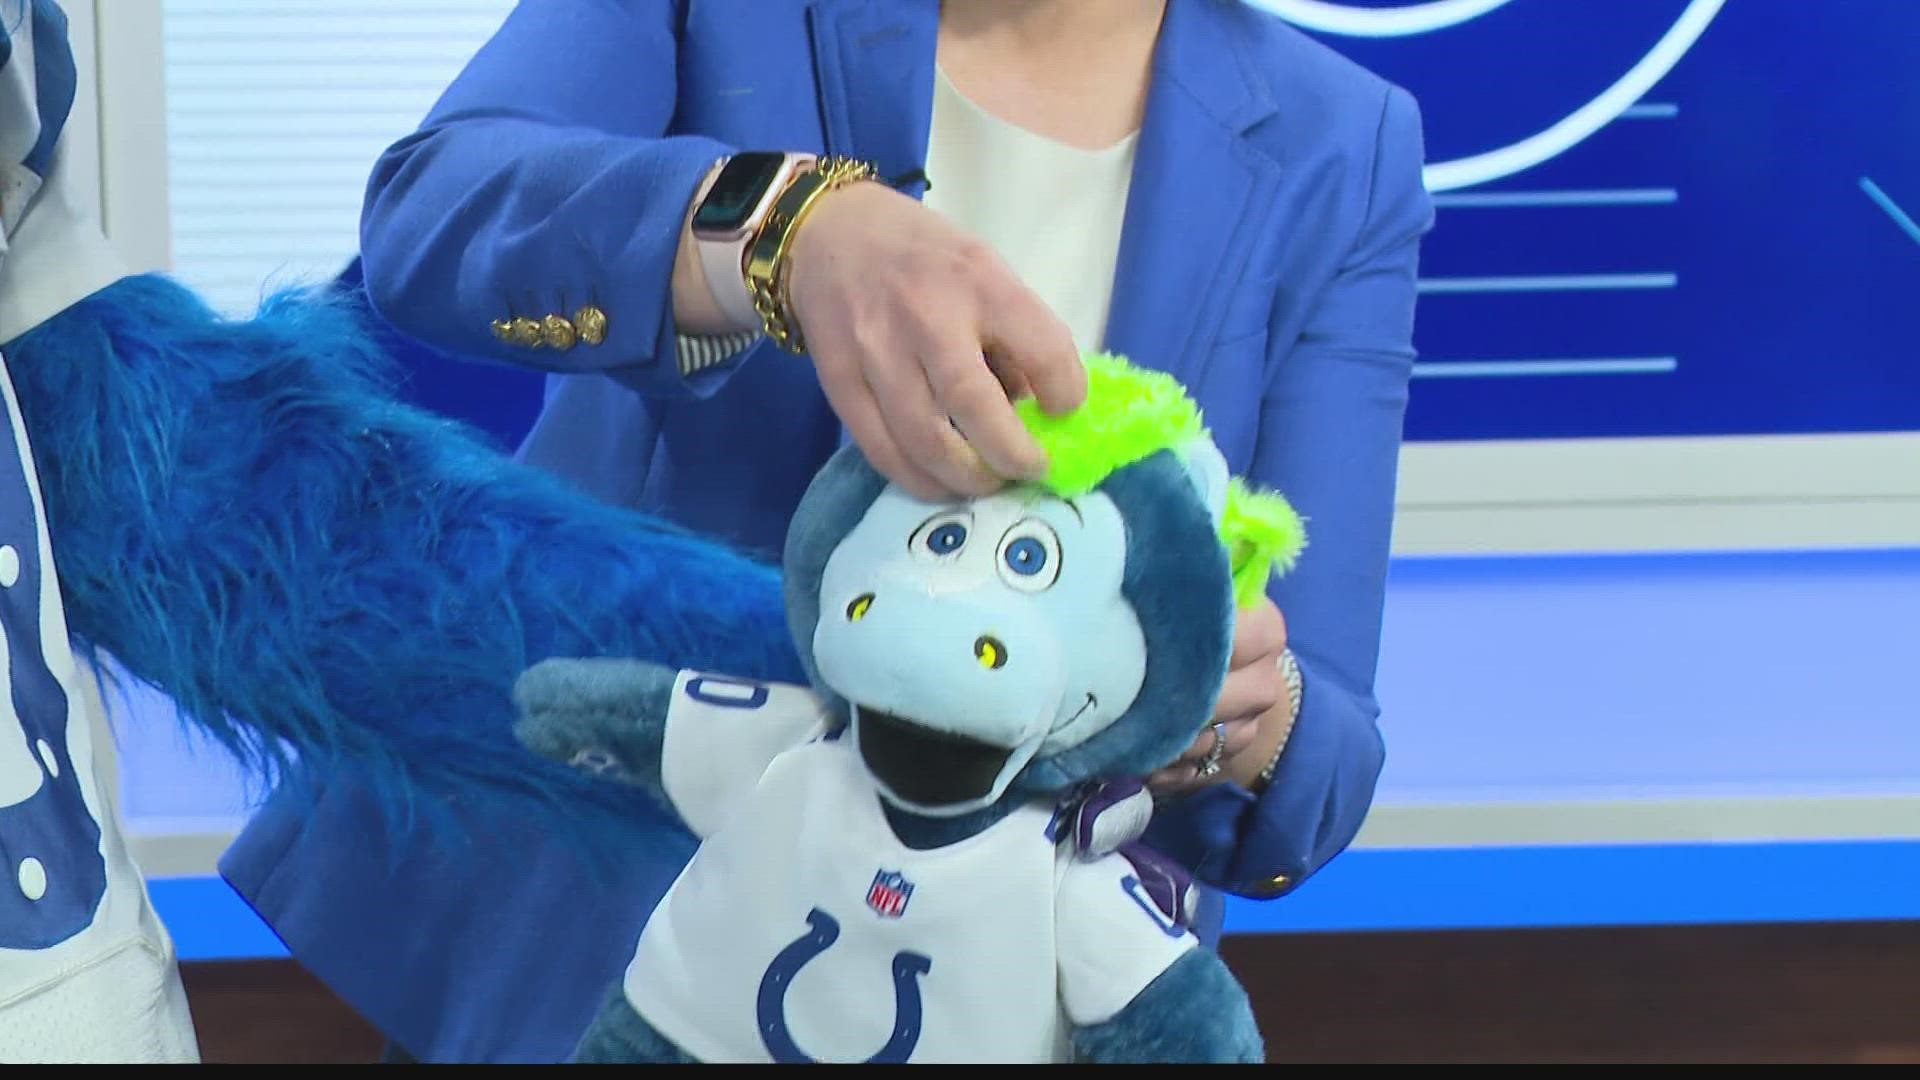 The Colts partnered with Build-A-Bear to produce a new stuffed replica of their mascot, Blue.